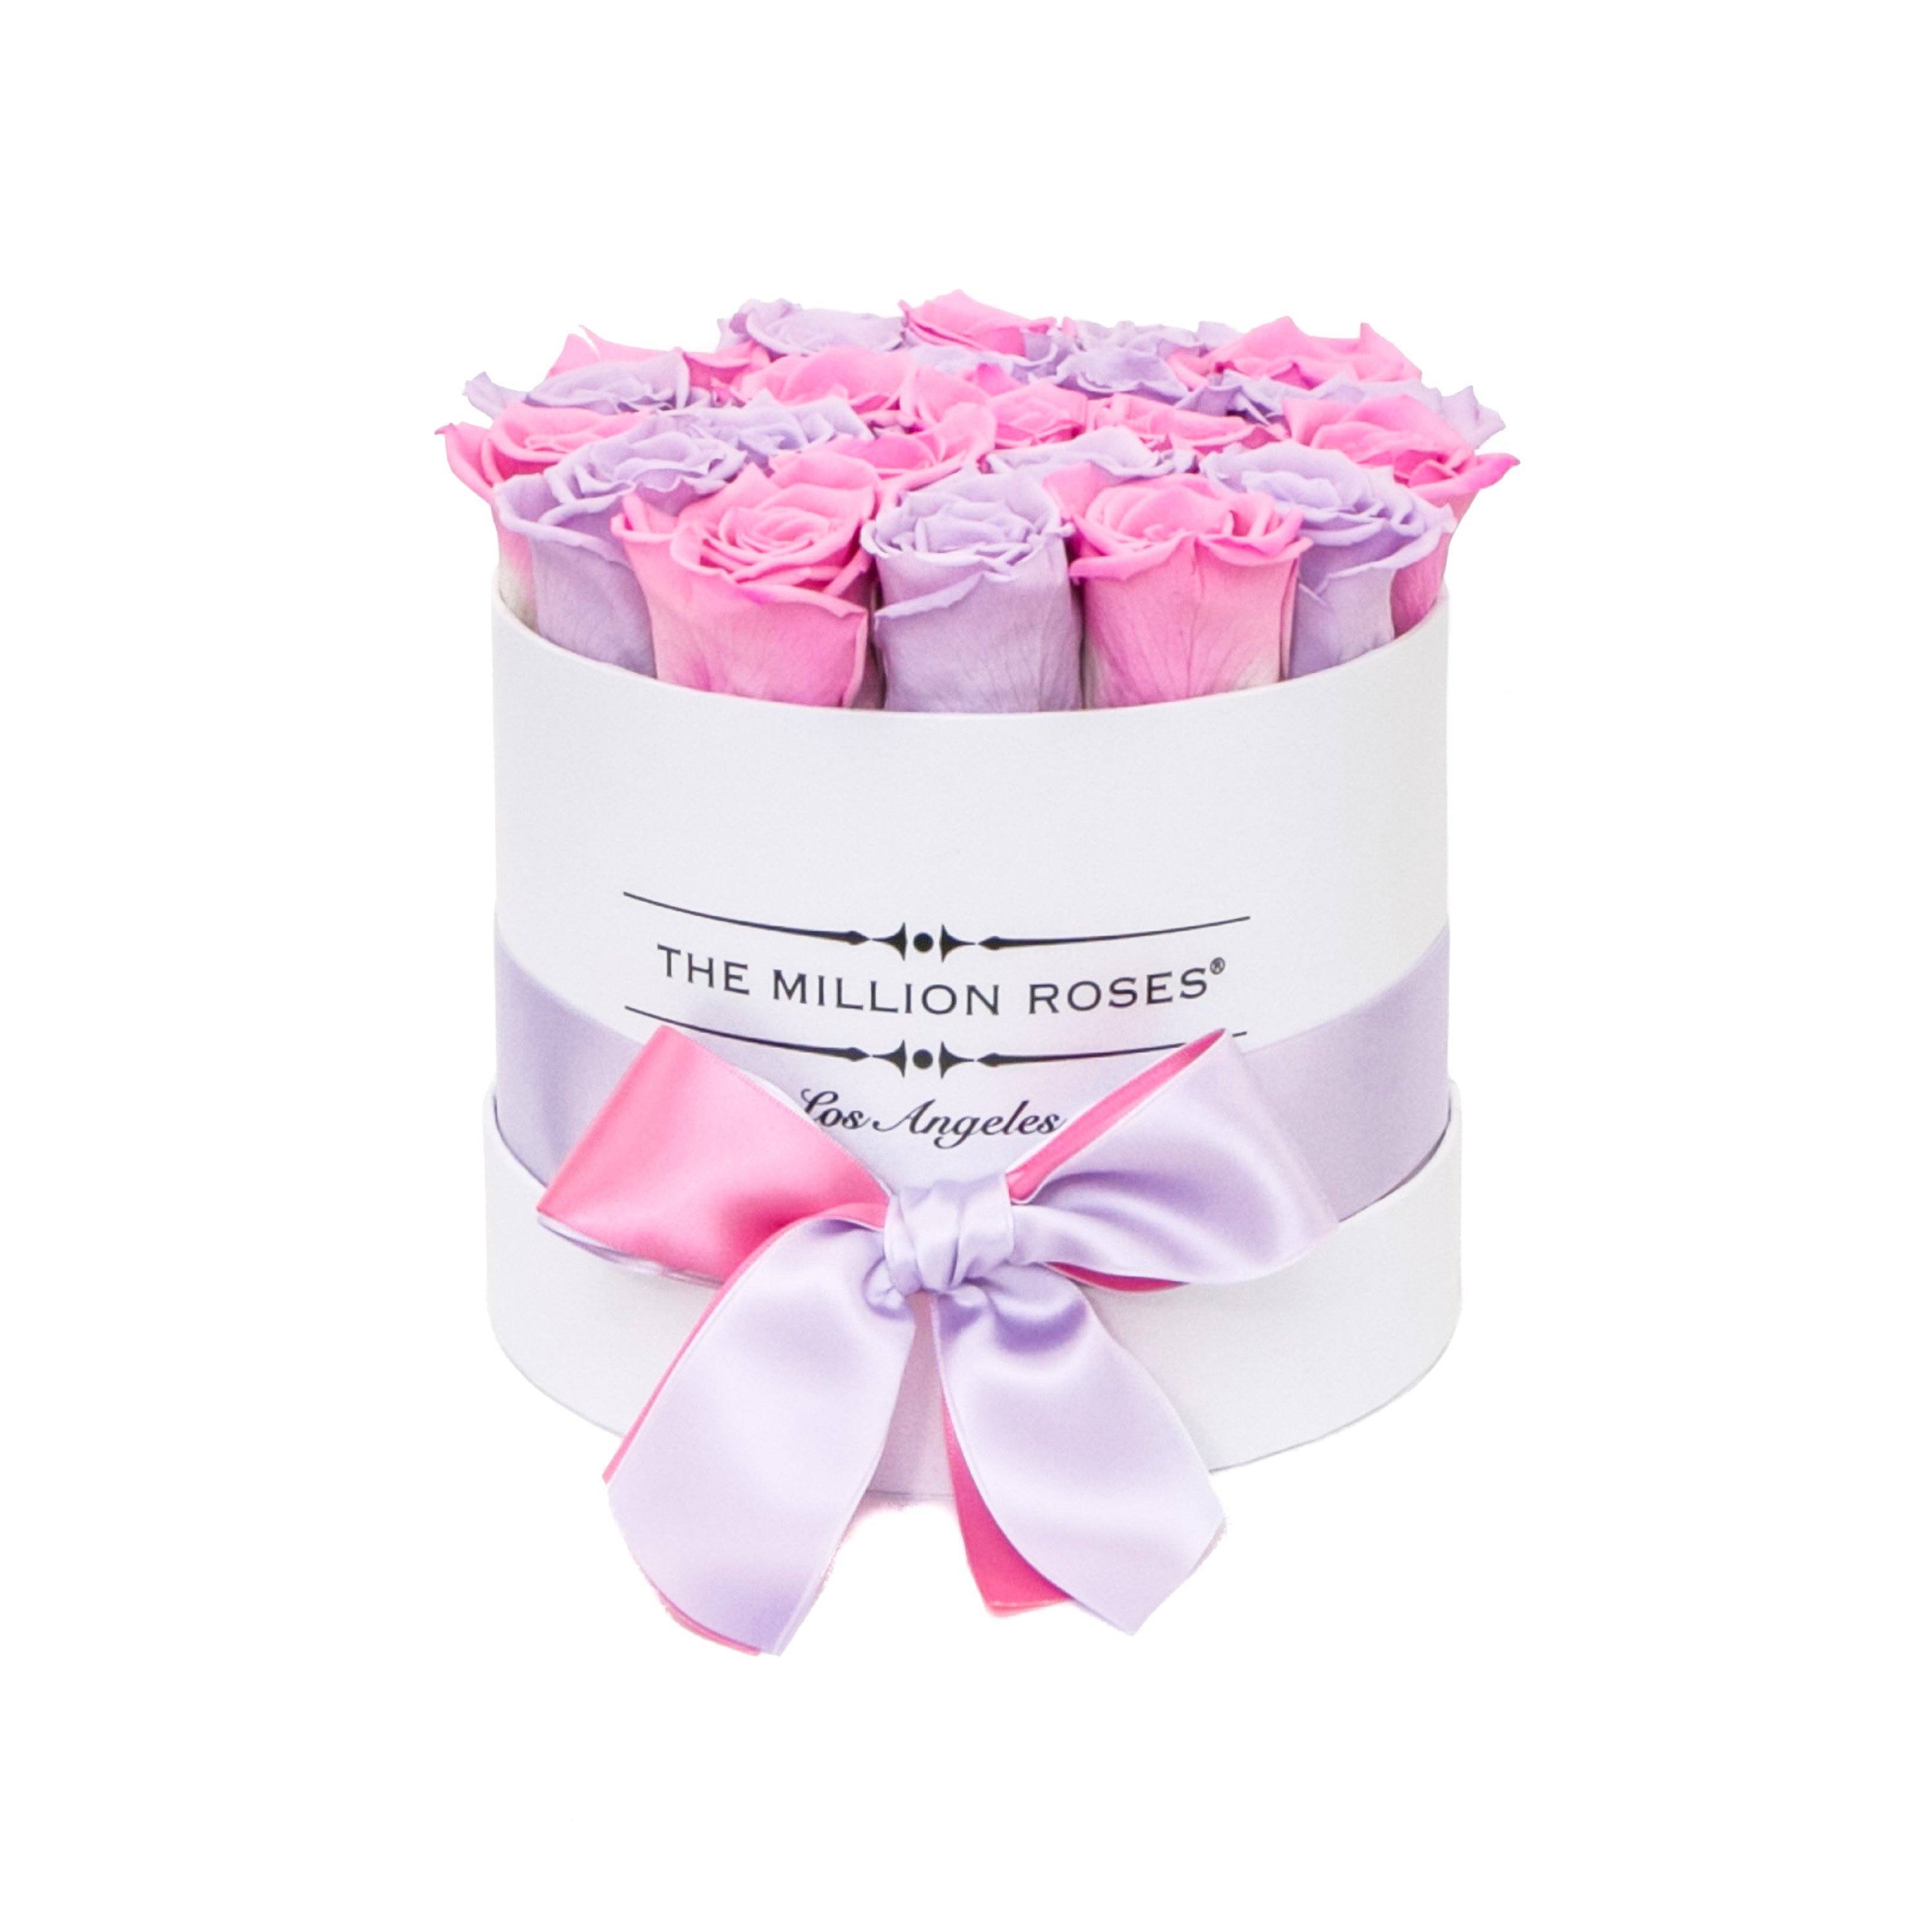 classic round box - white - lavender&pink-candy roses mixed eternity roses - the million roses